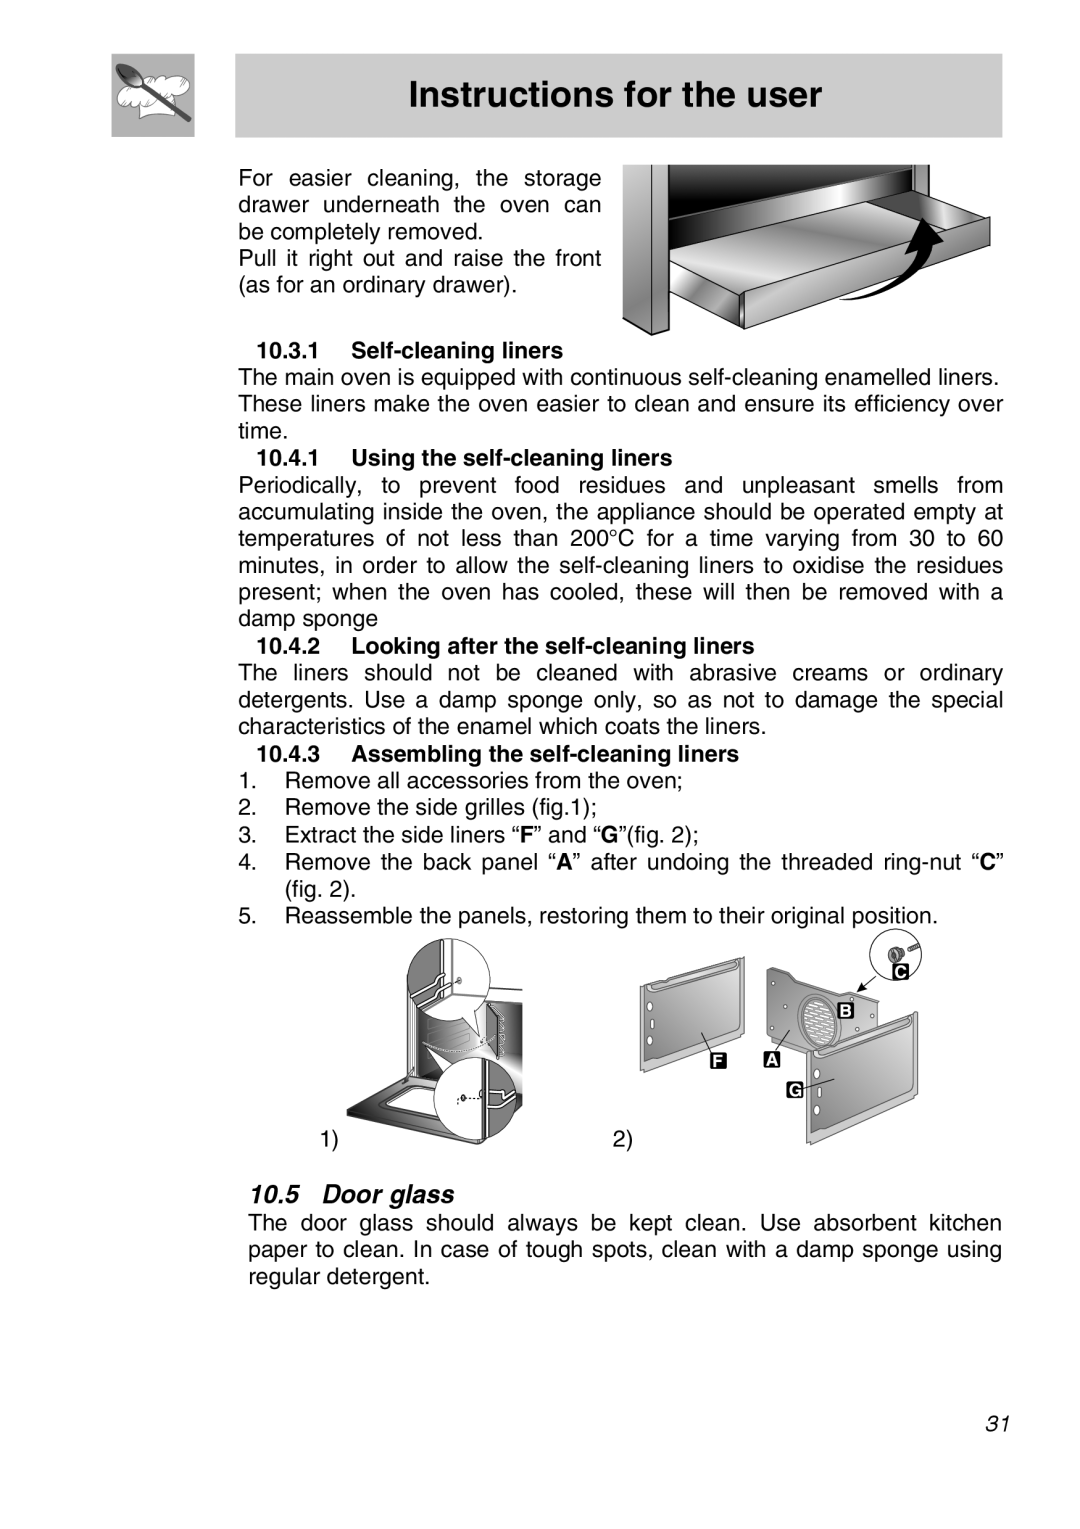 Smeg A11A-6 manual Instructions for the user, Self-cleaning liners, Using the self-cleaning liners 